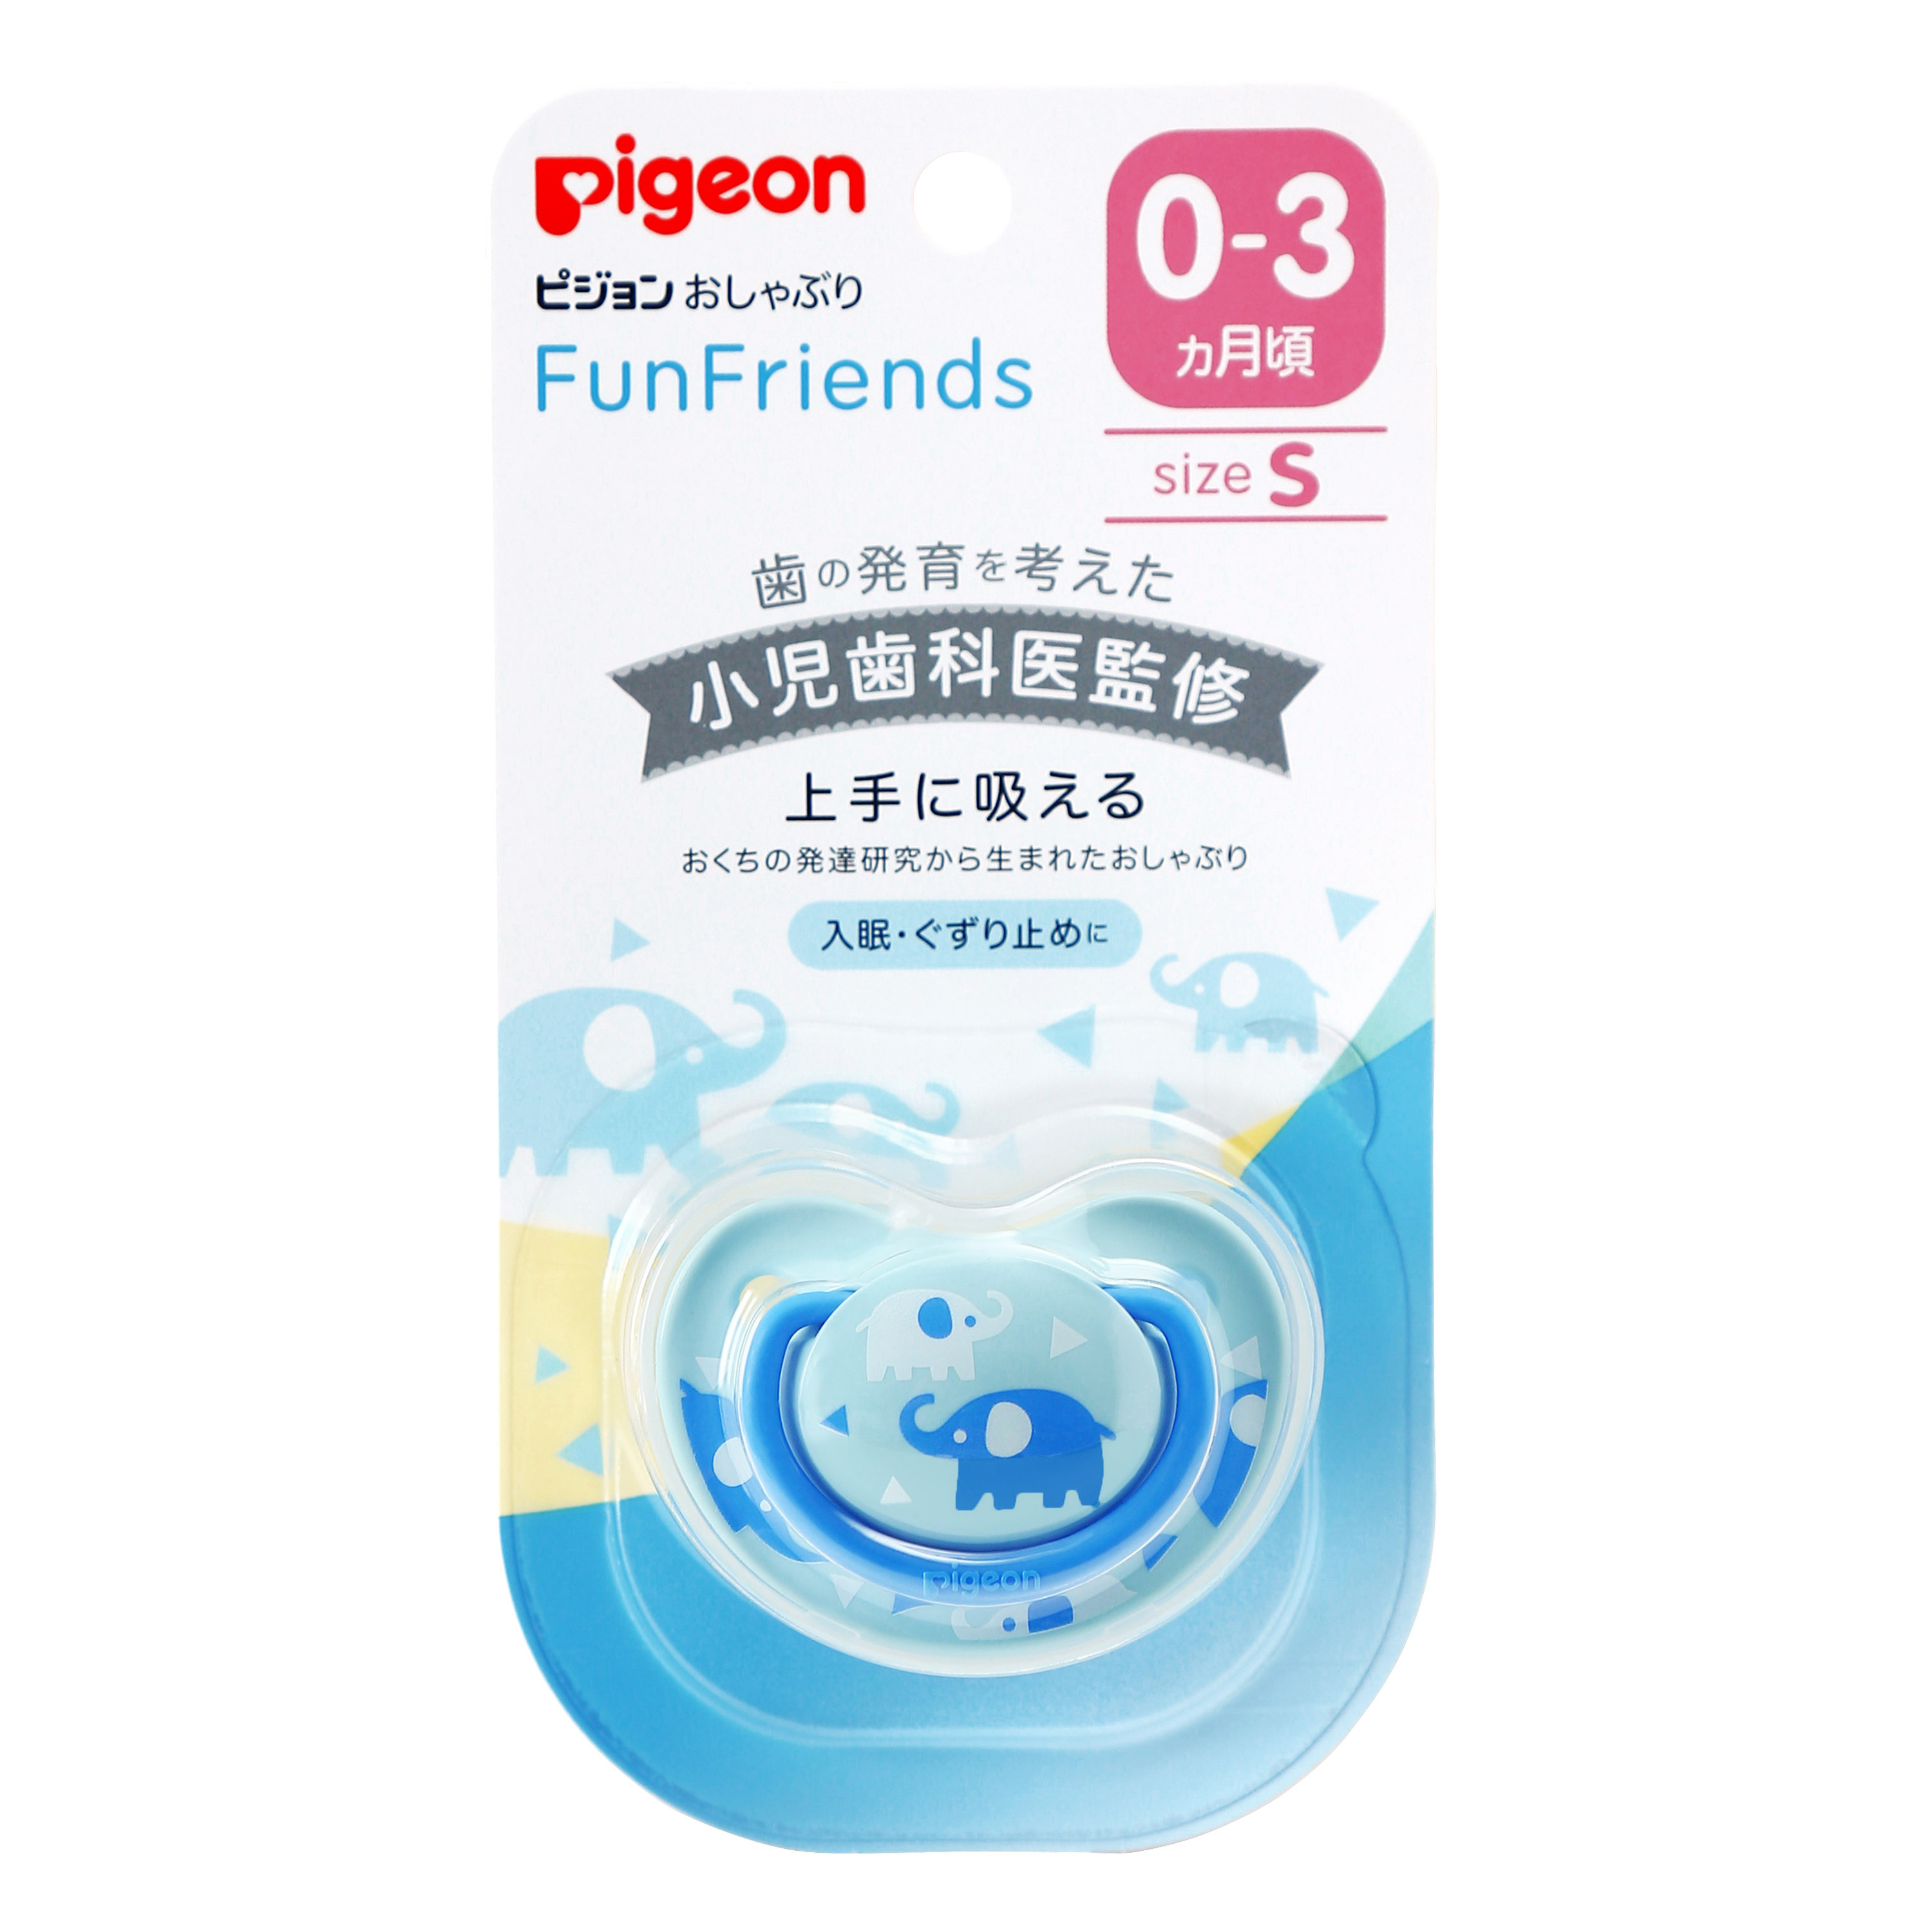 Pigeon Soother Funfriends S Size - Elephant (JP) (PG-1018860)